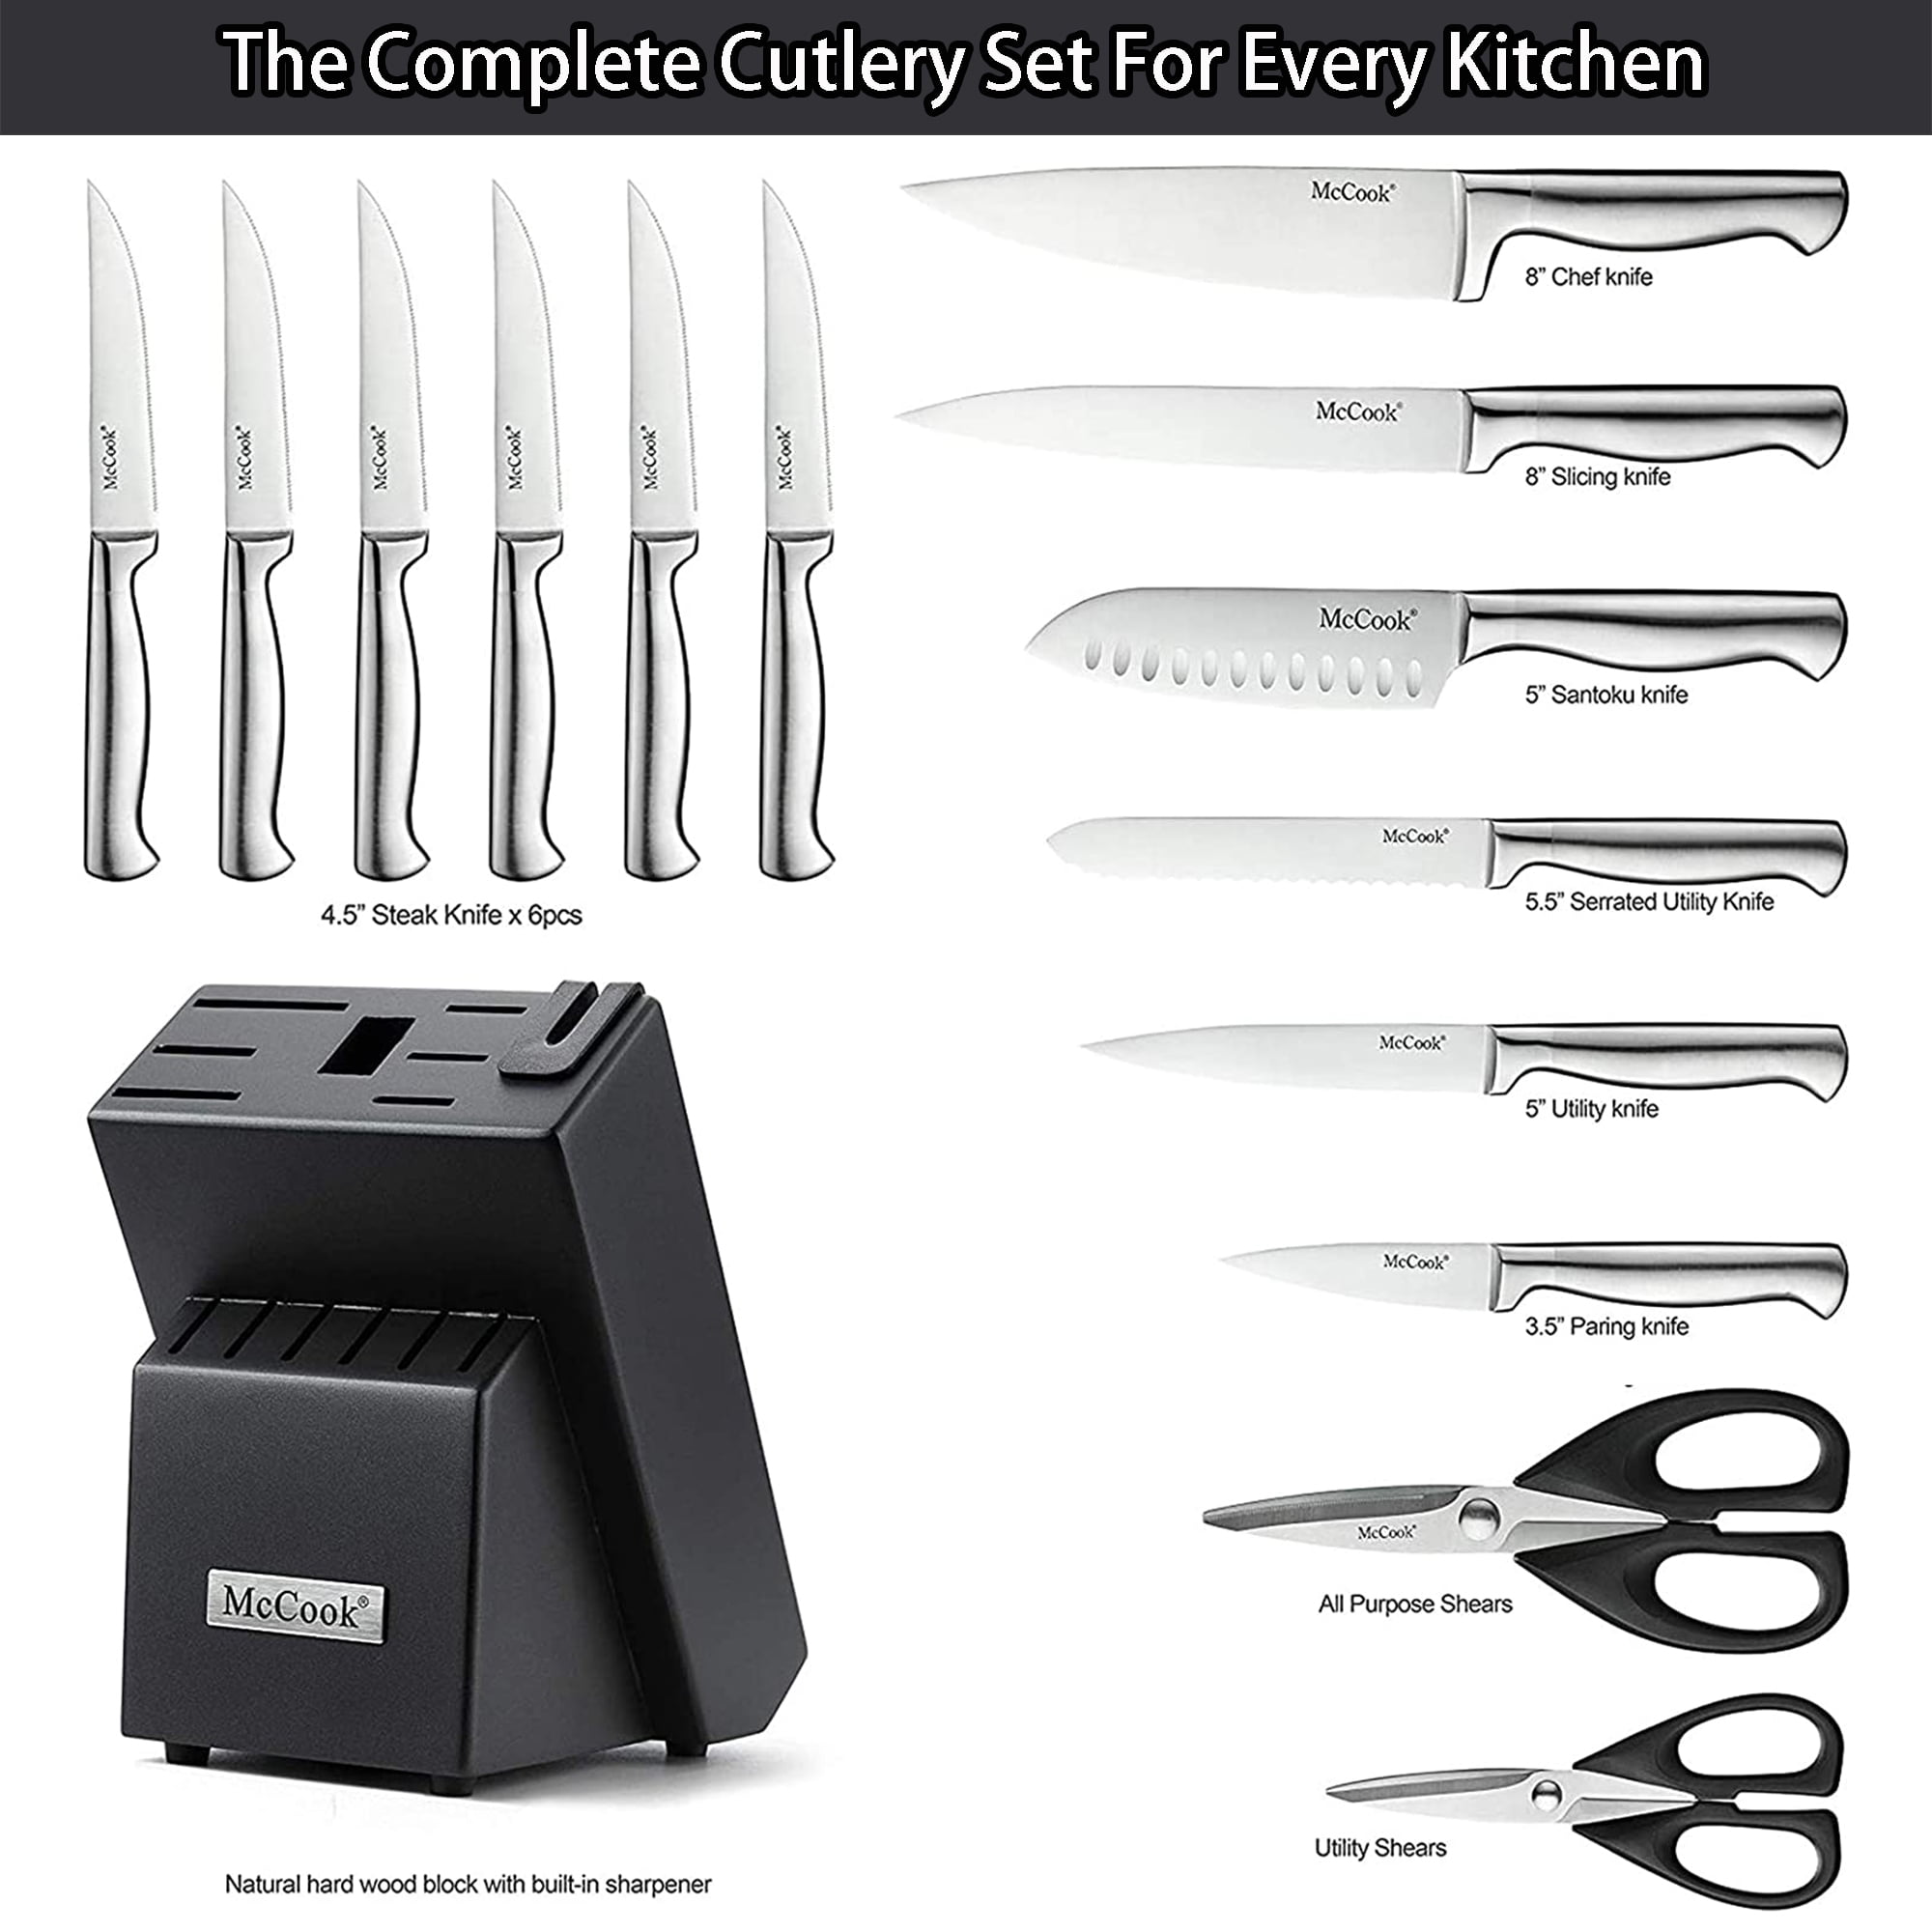 Best Budget Kitchen Knife Set Under $100? McCook MC29 Review and